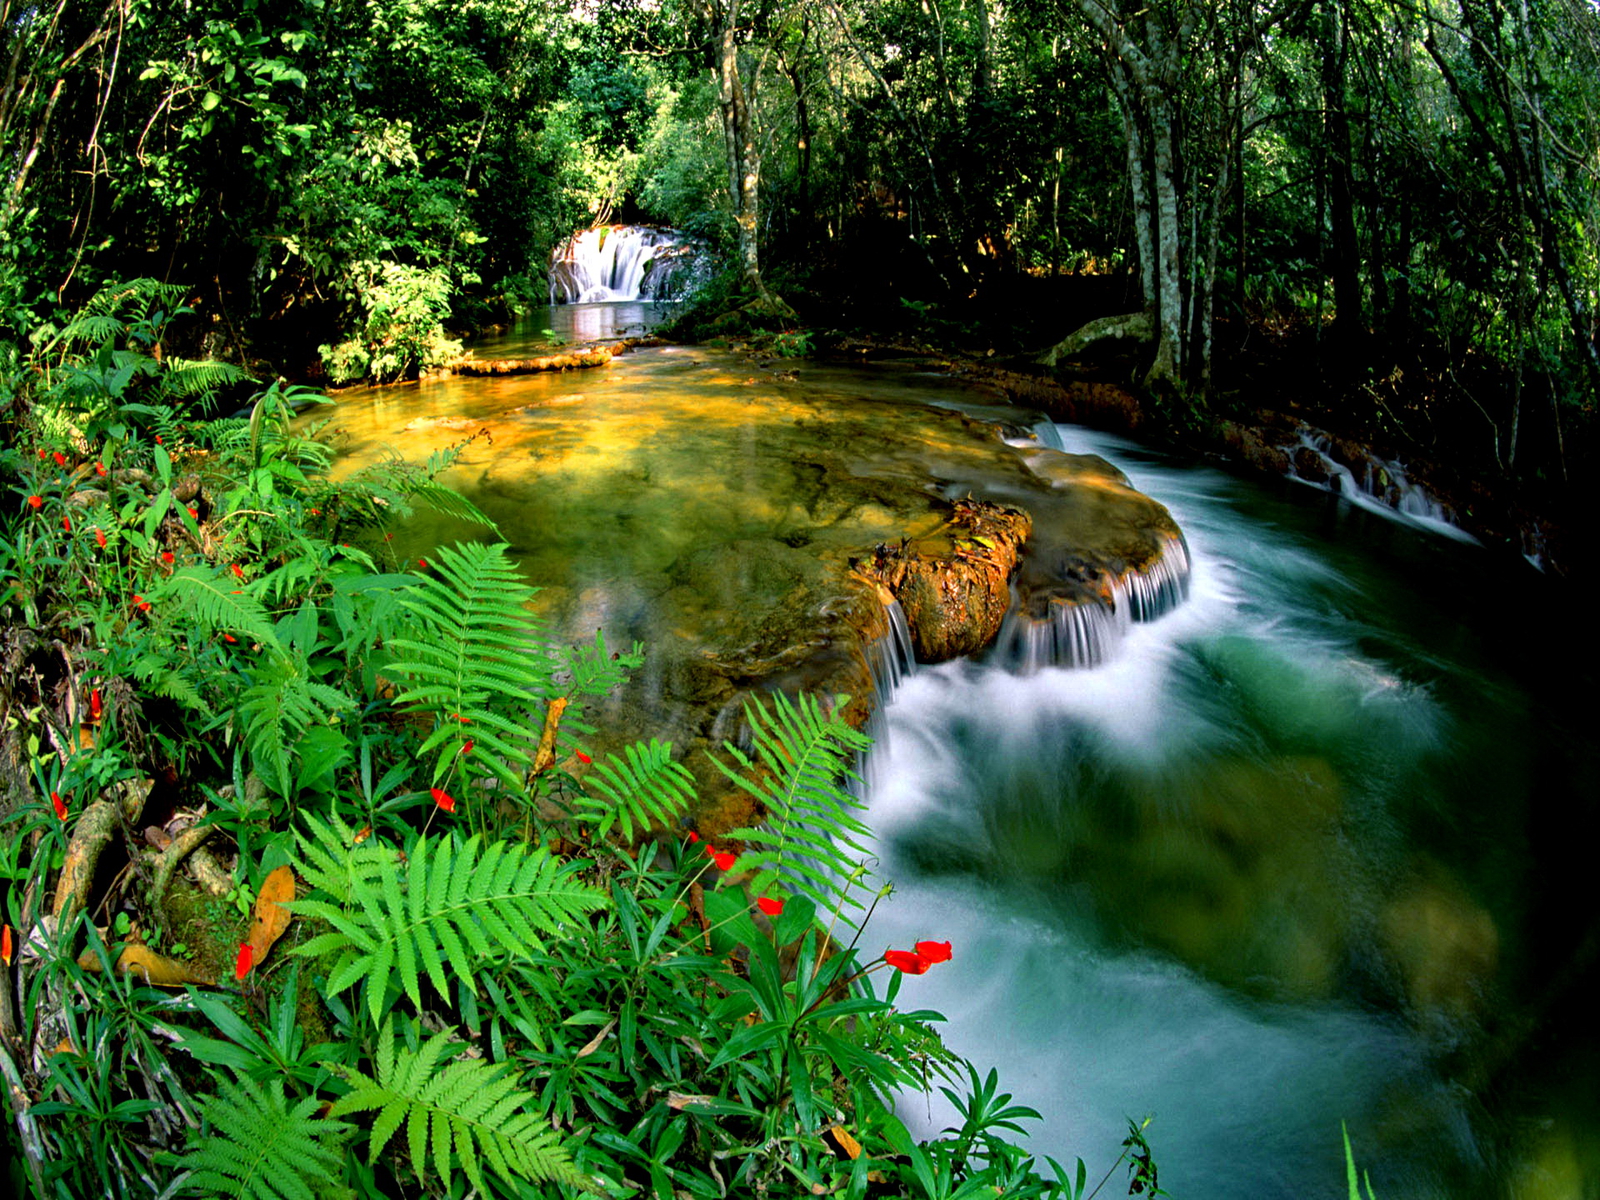 jungle wallpaper hd,natural landscape,nature,body of water,vegetation,water resources